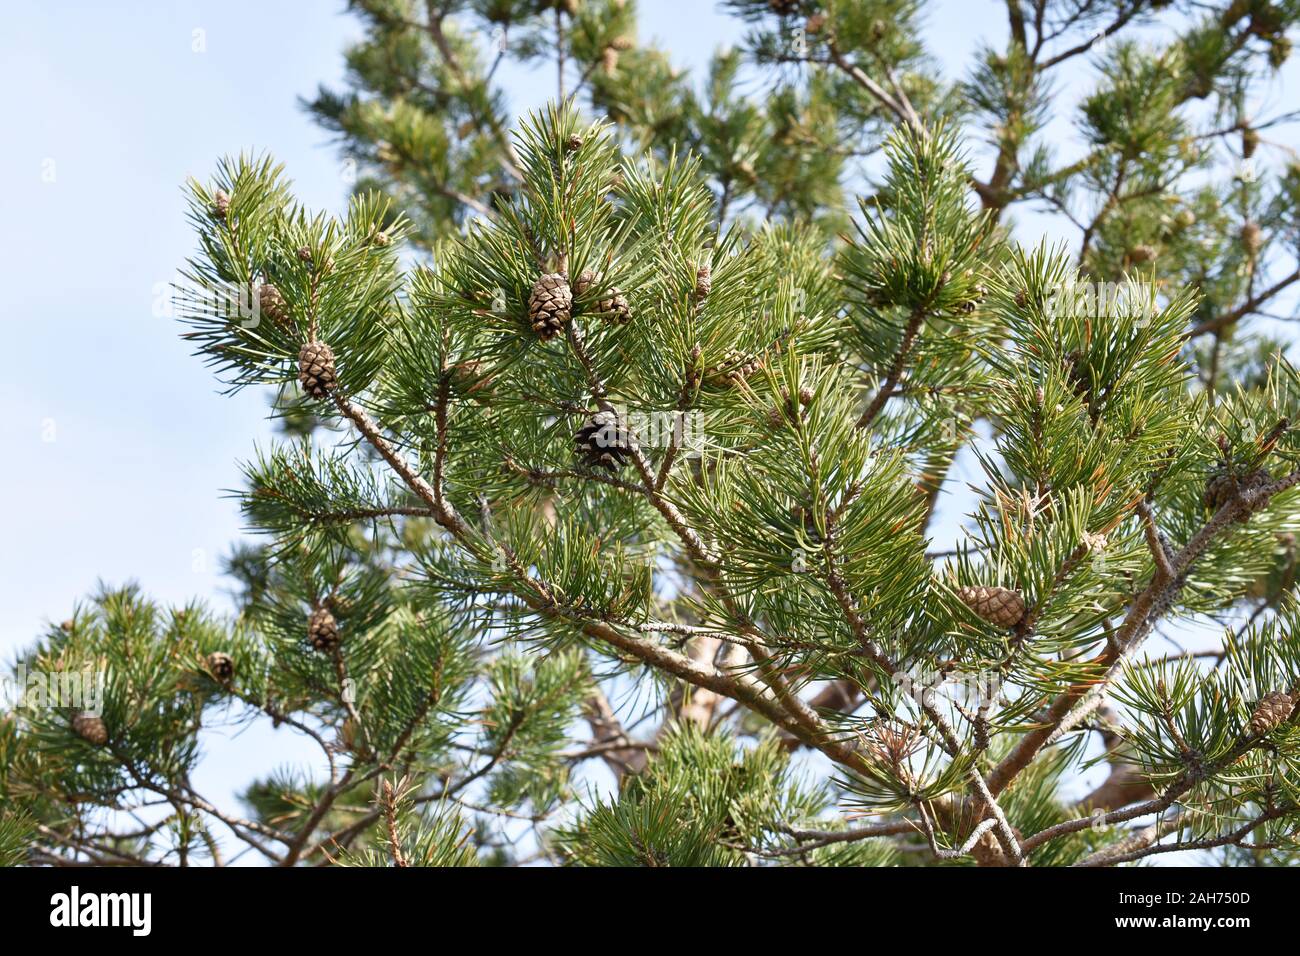 Closeup on pine branches pinus sylvestris  with brown cones Stock Photo